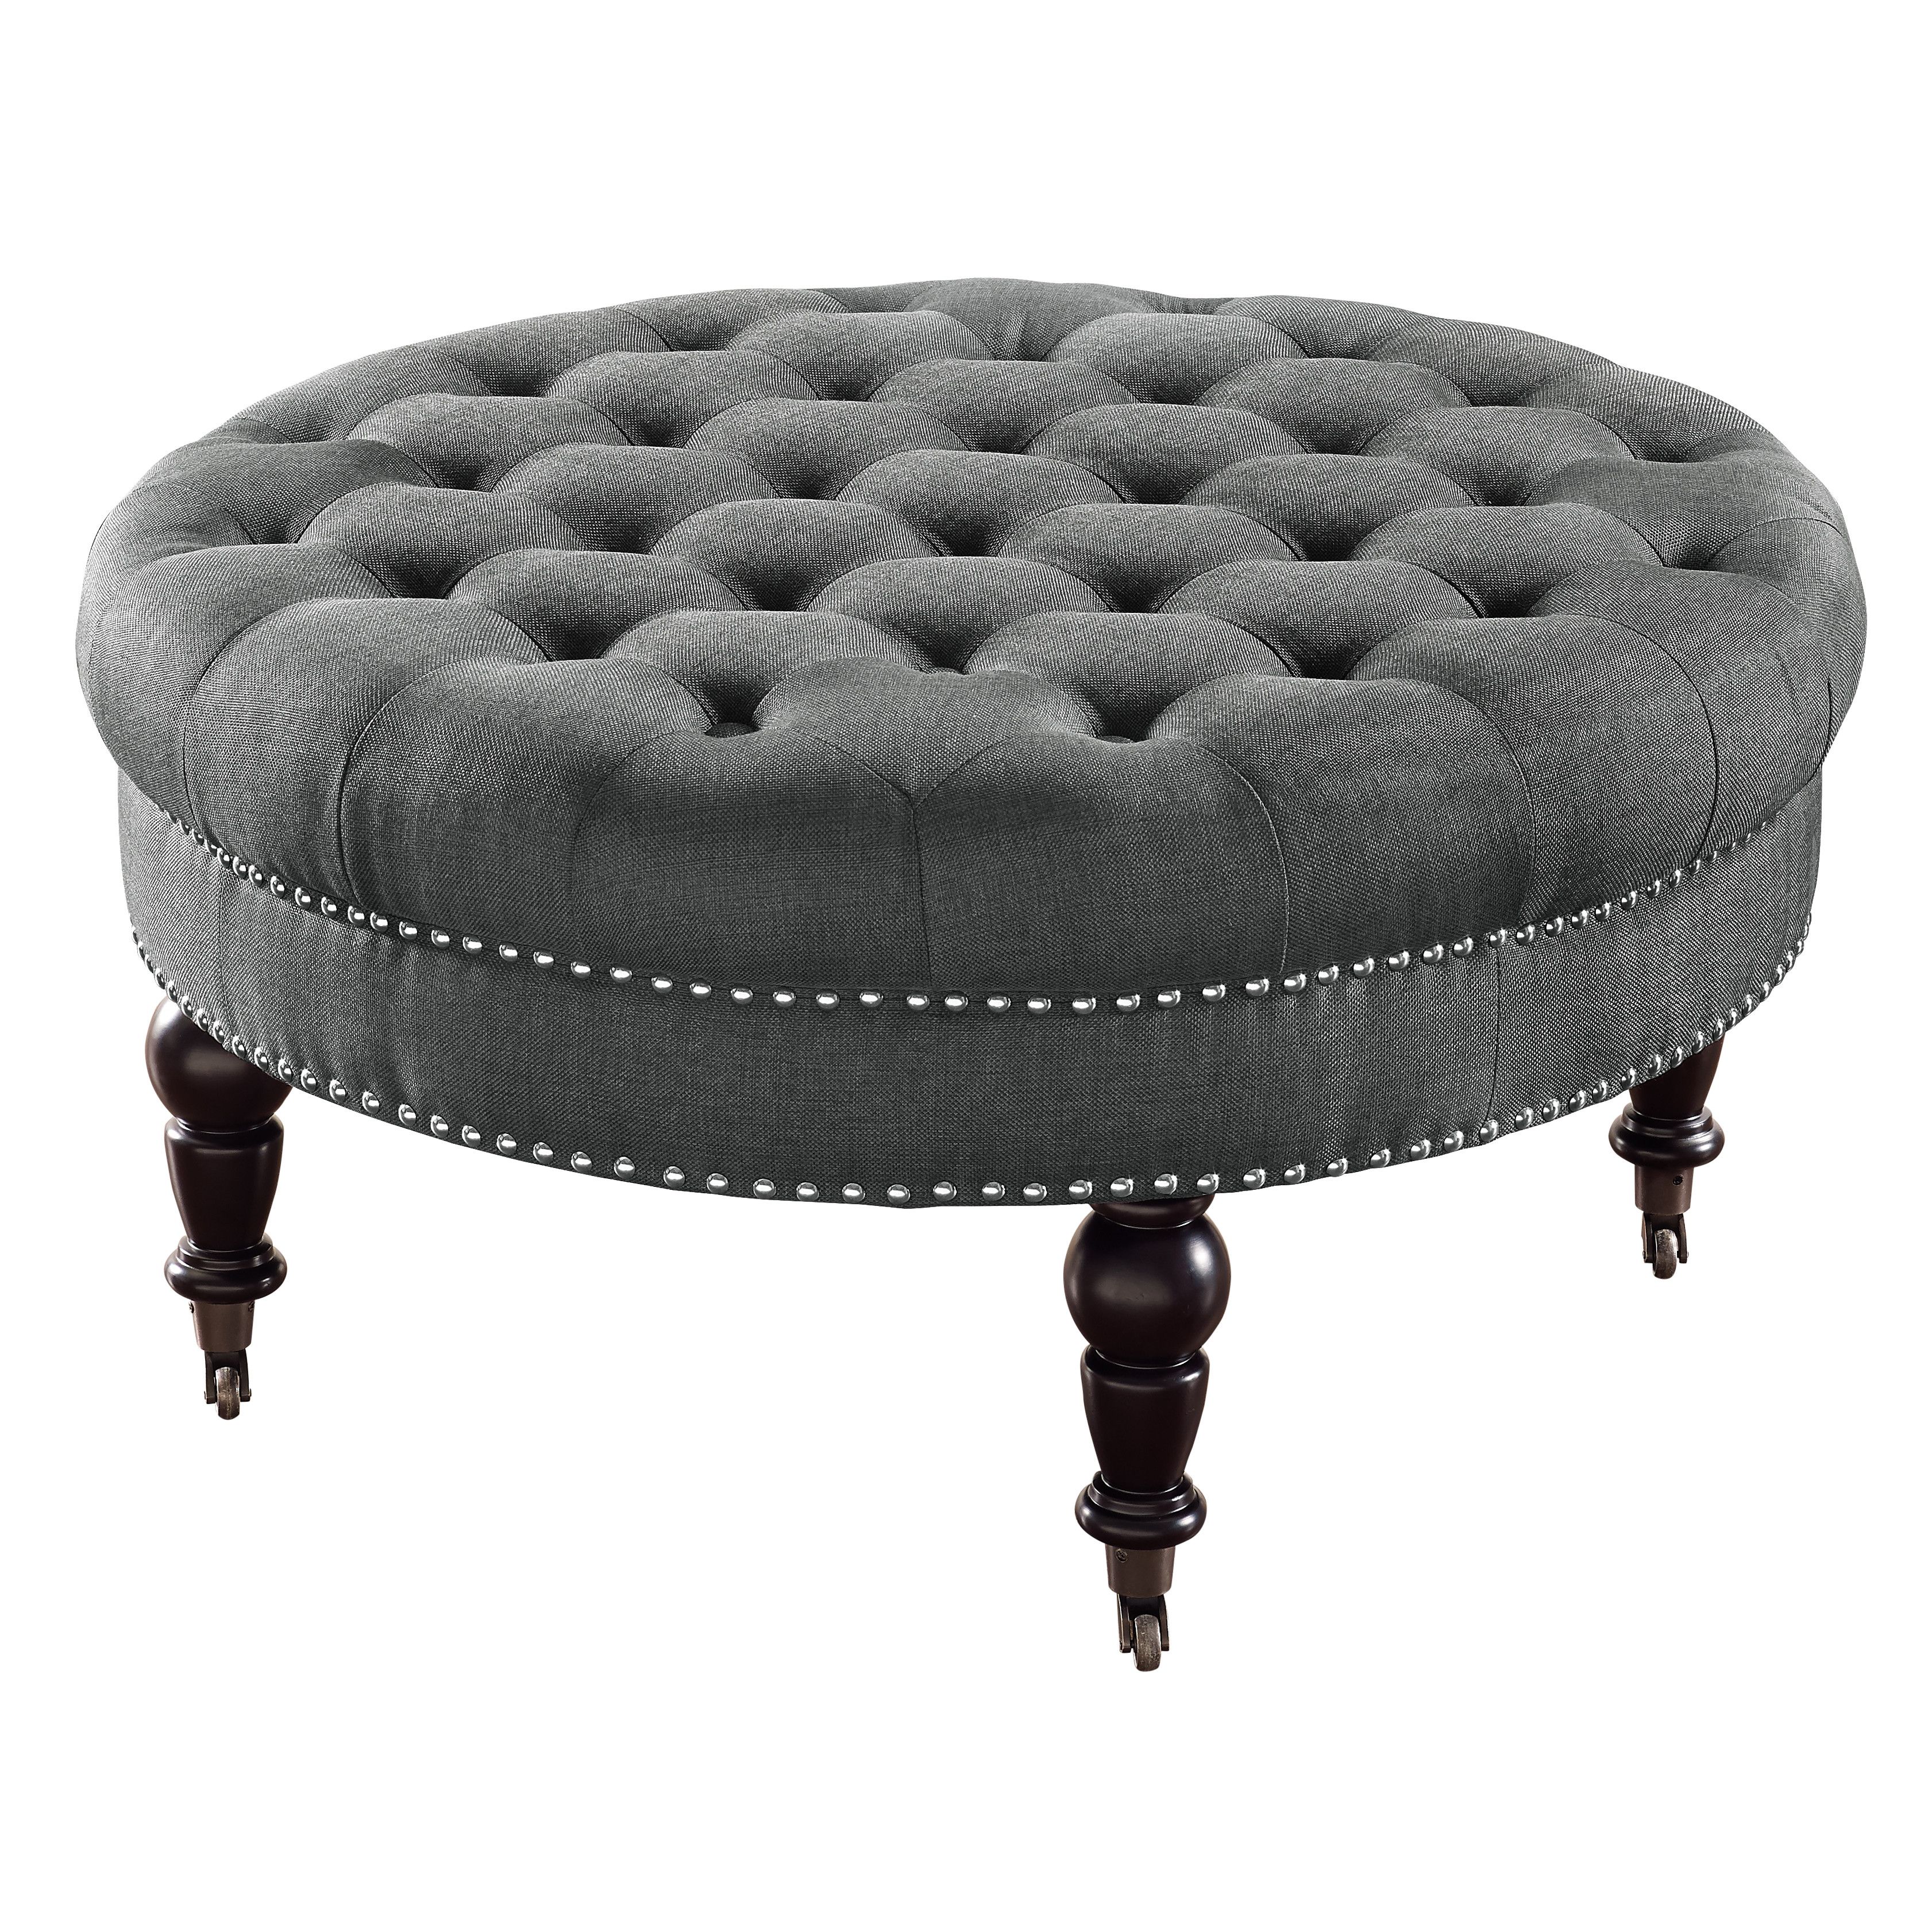 Gahn Round Tufted Ottoman Black Round Ottoman Coffee Table Great For Added Seating Sturdy Black Round Plastic Legs Black Fabric (View 5 of 10)